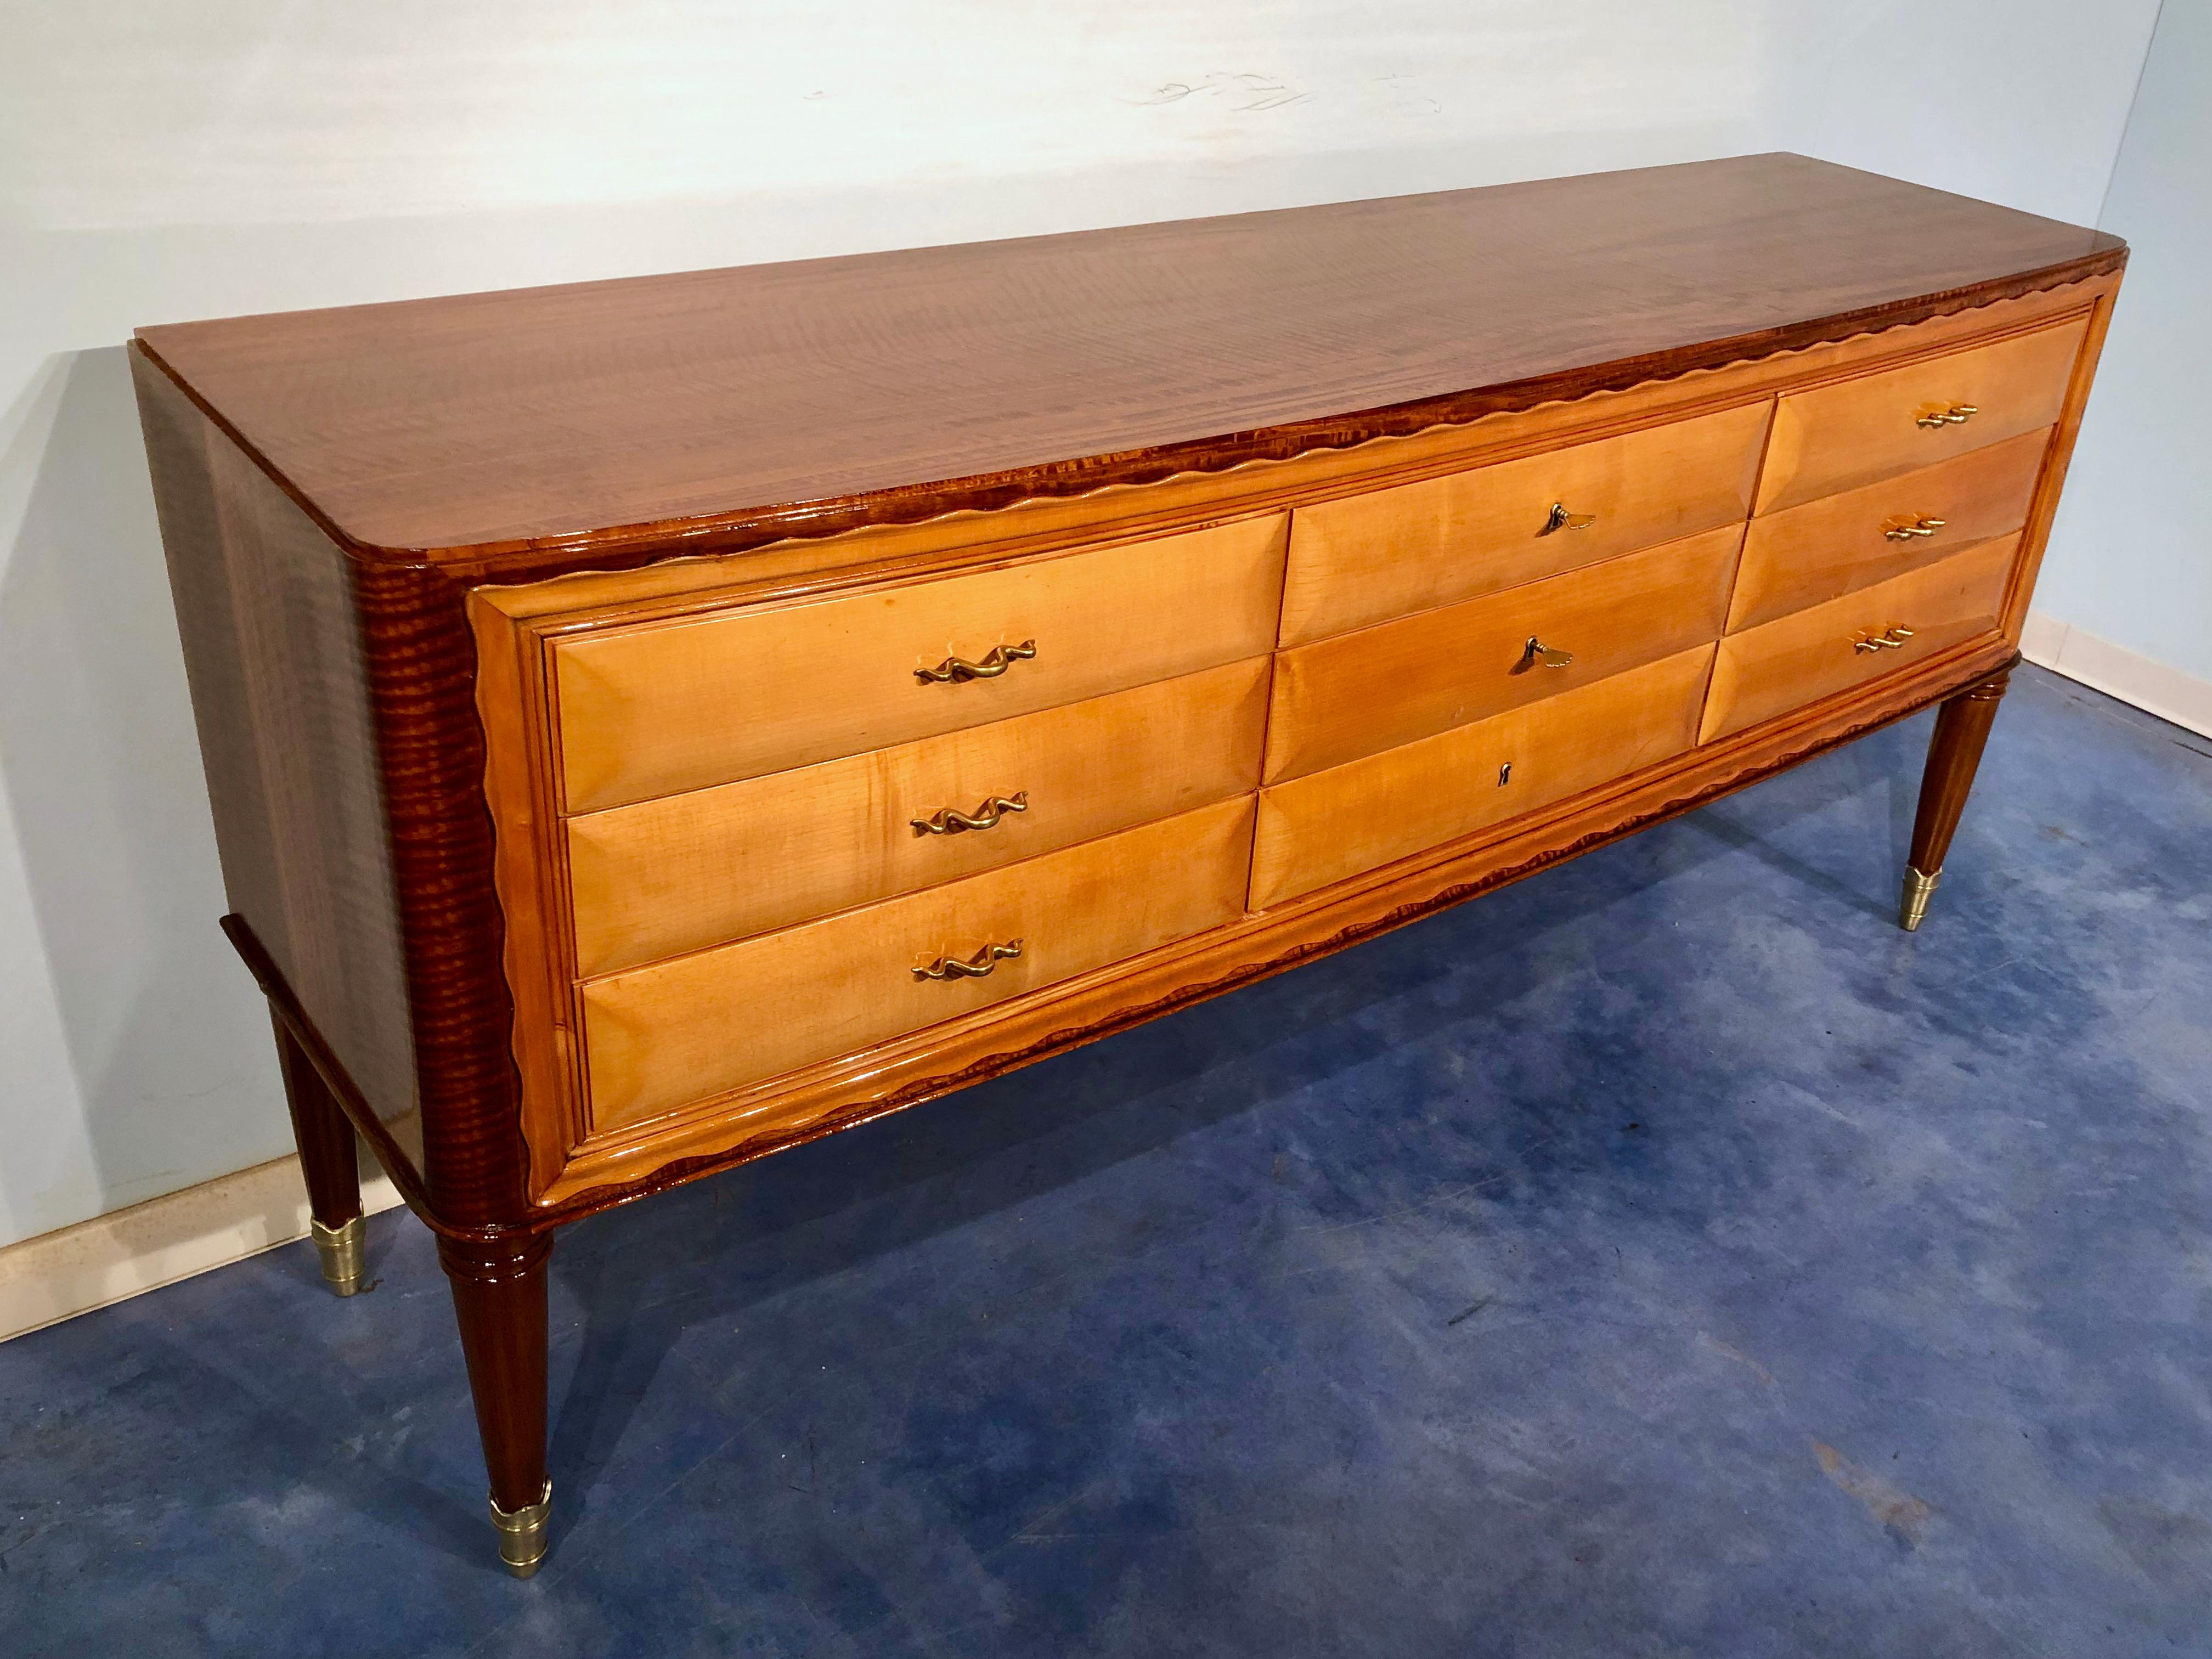 Italian Midcentury Sideboard or Chest of Drawers by Paolo Buffa, 1950s For Sale 1